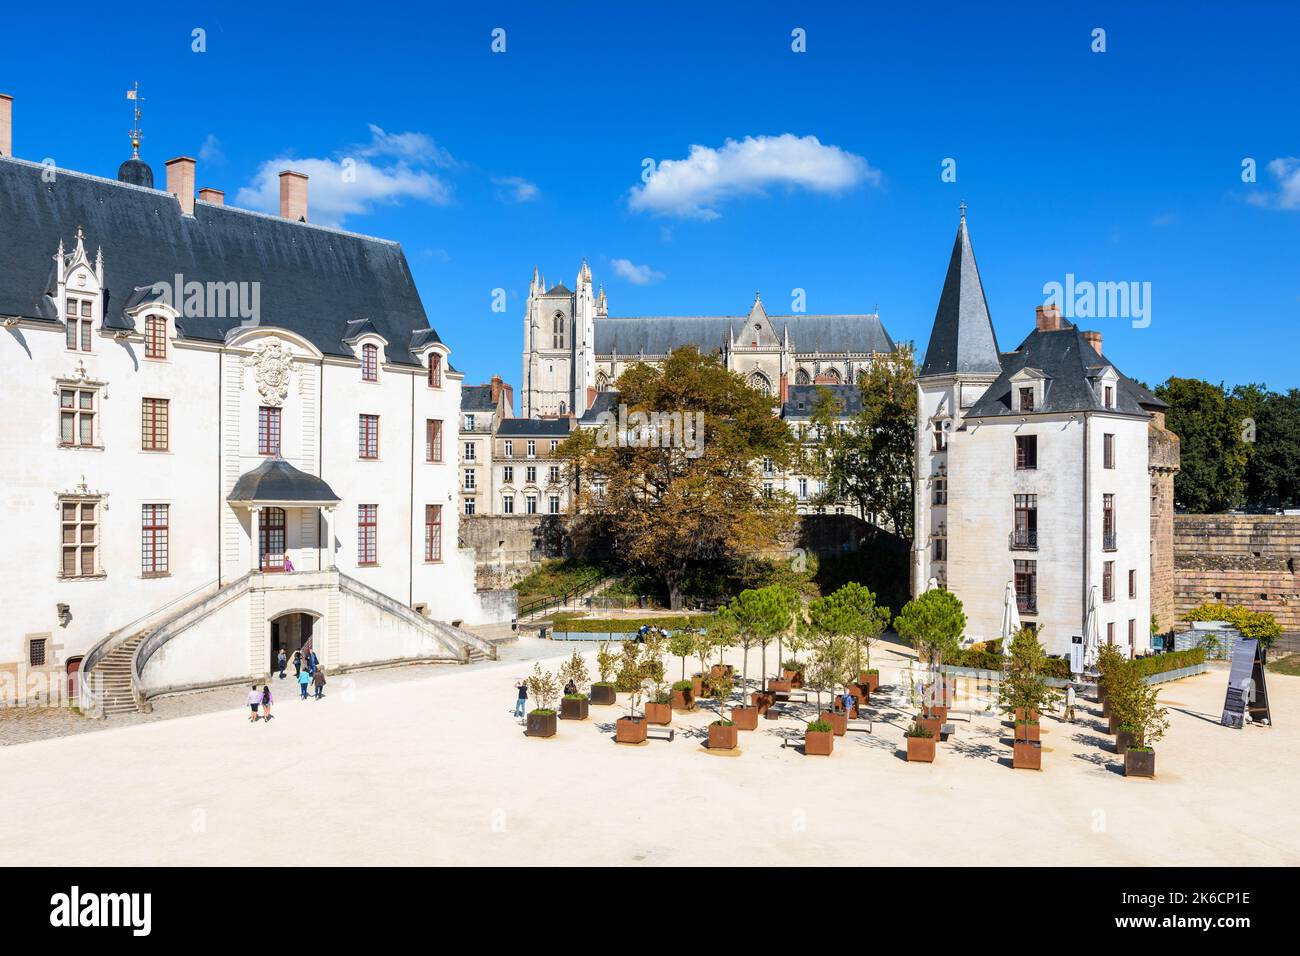 General view of the Château des Ducs de Bretagne (Castle of the Dukes of Brittany) in Nantes, France, with the Cathedral in the distance. Stock Photo